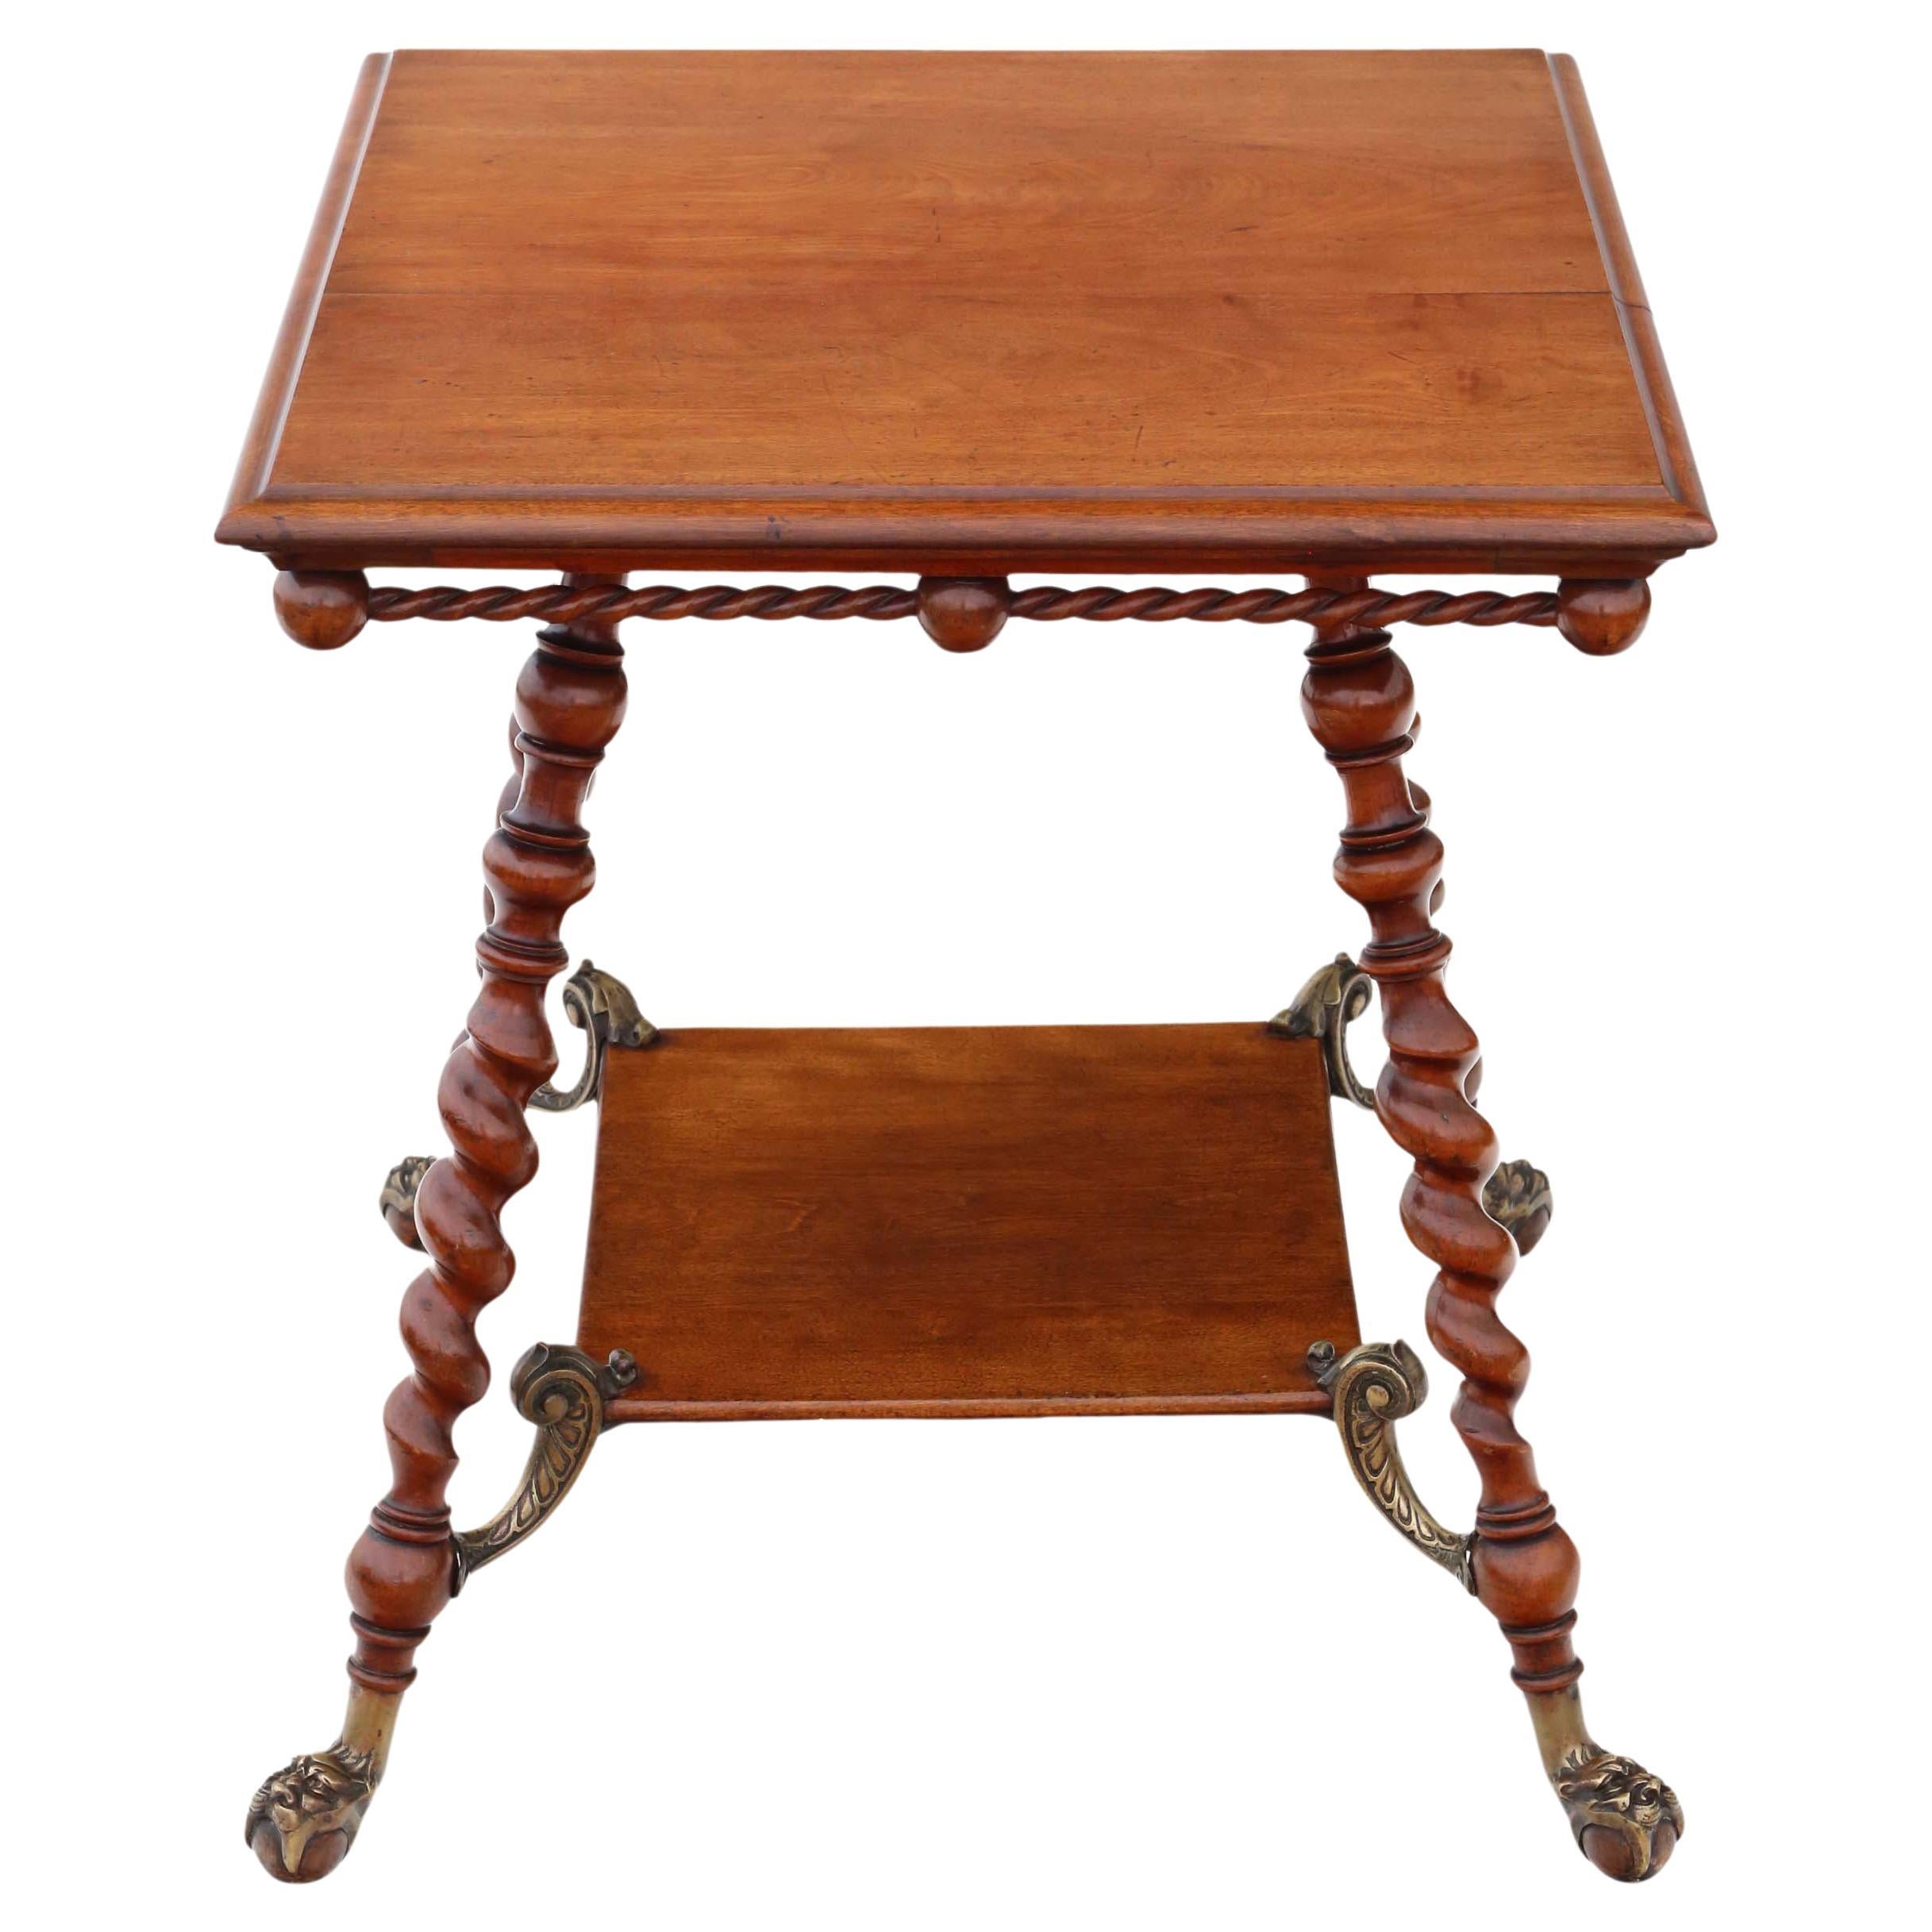 Fine Quality Victorian Red Walnut and Brass Centre Table from circa 1880-1900, A For Sale